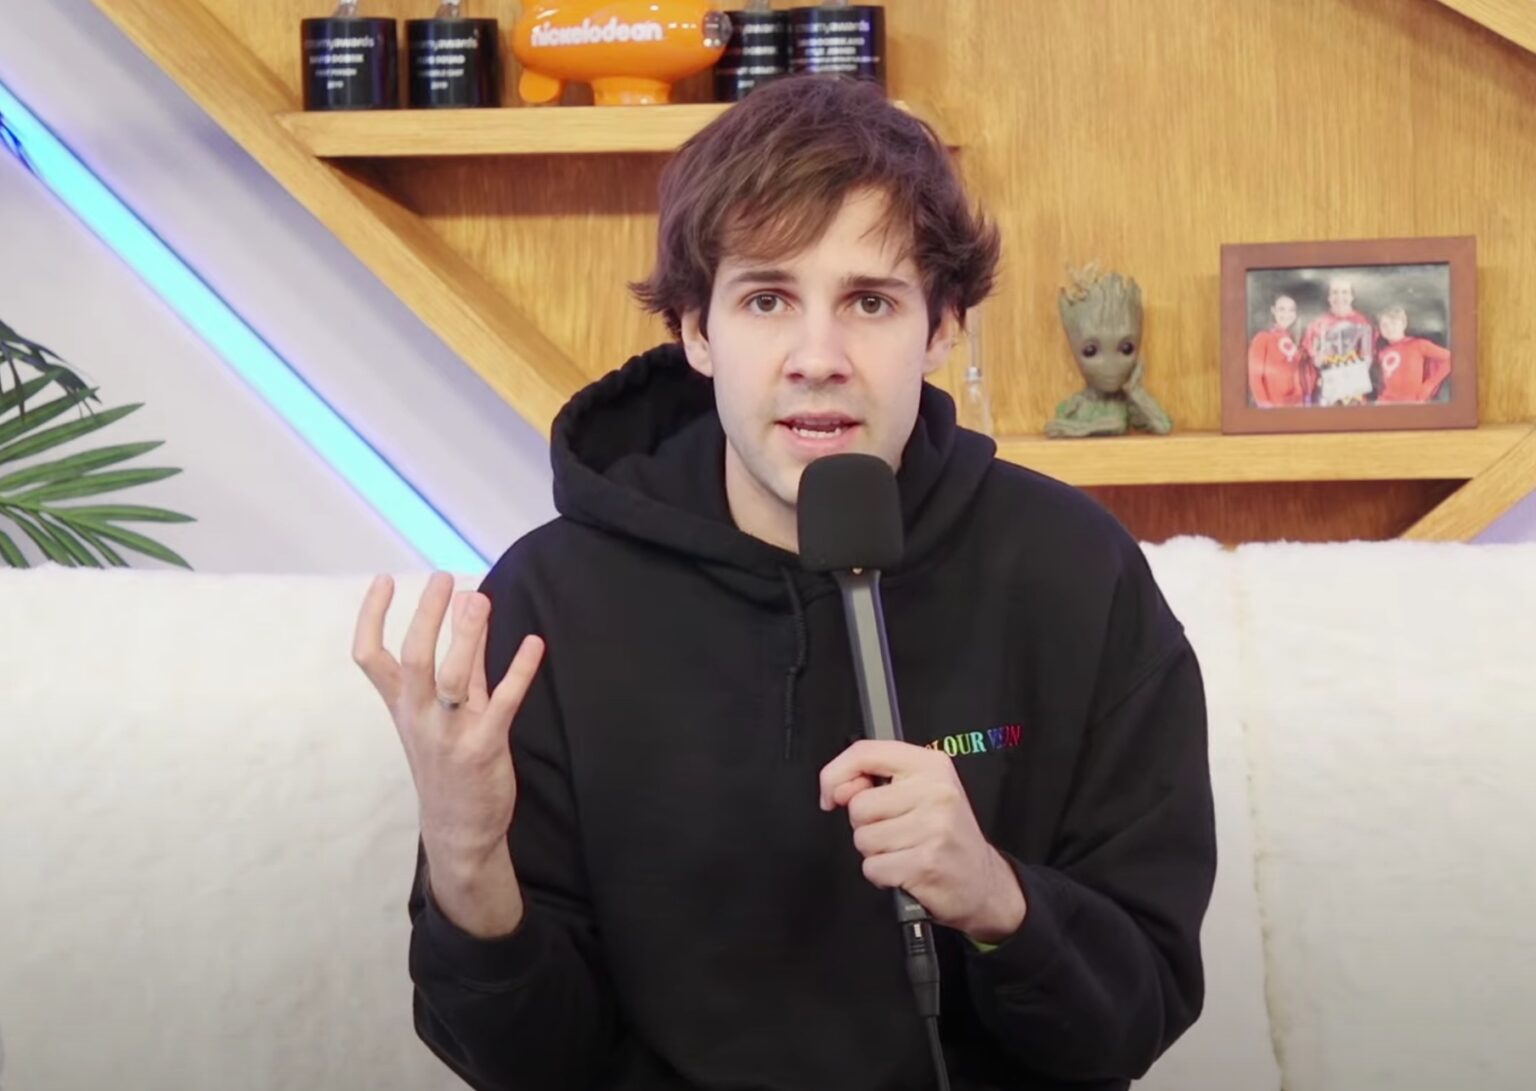 Will David Dobrik face the consequences for his content? How have the recent allegations affected his YouTube career? Let’s dive in.